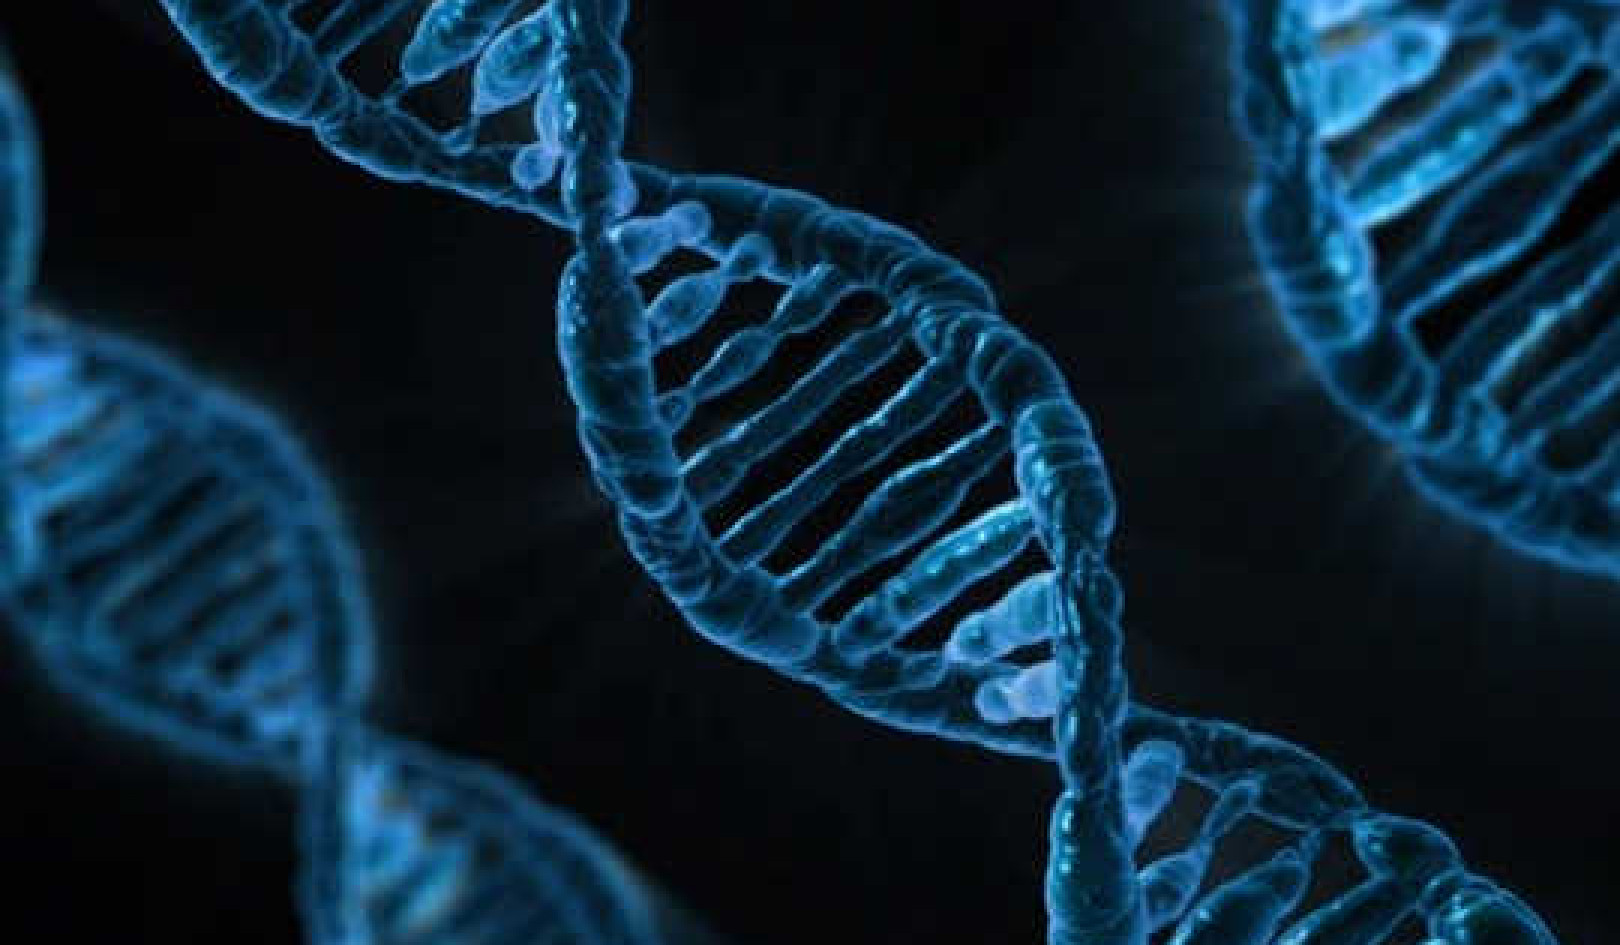 How Much Do Our Genes Restrict Free Will?